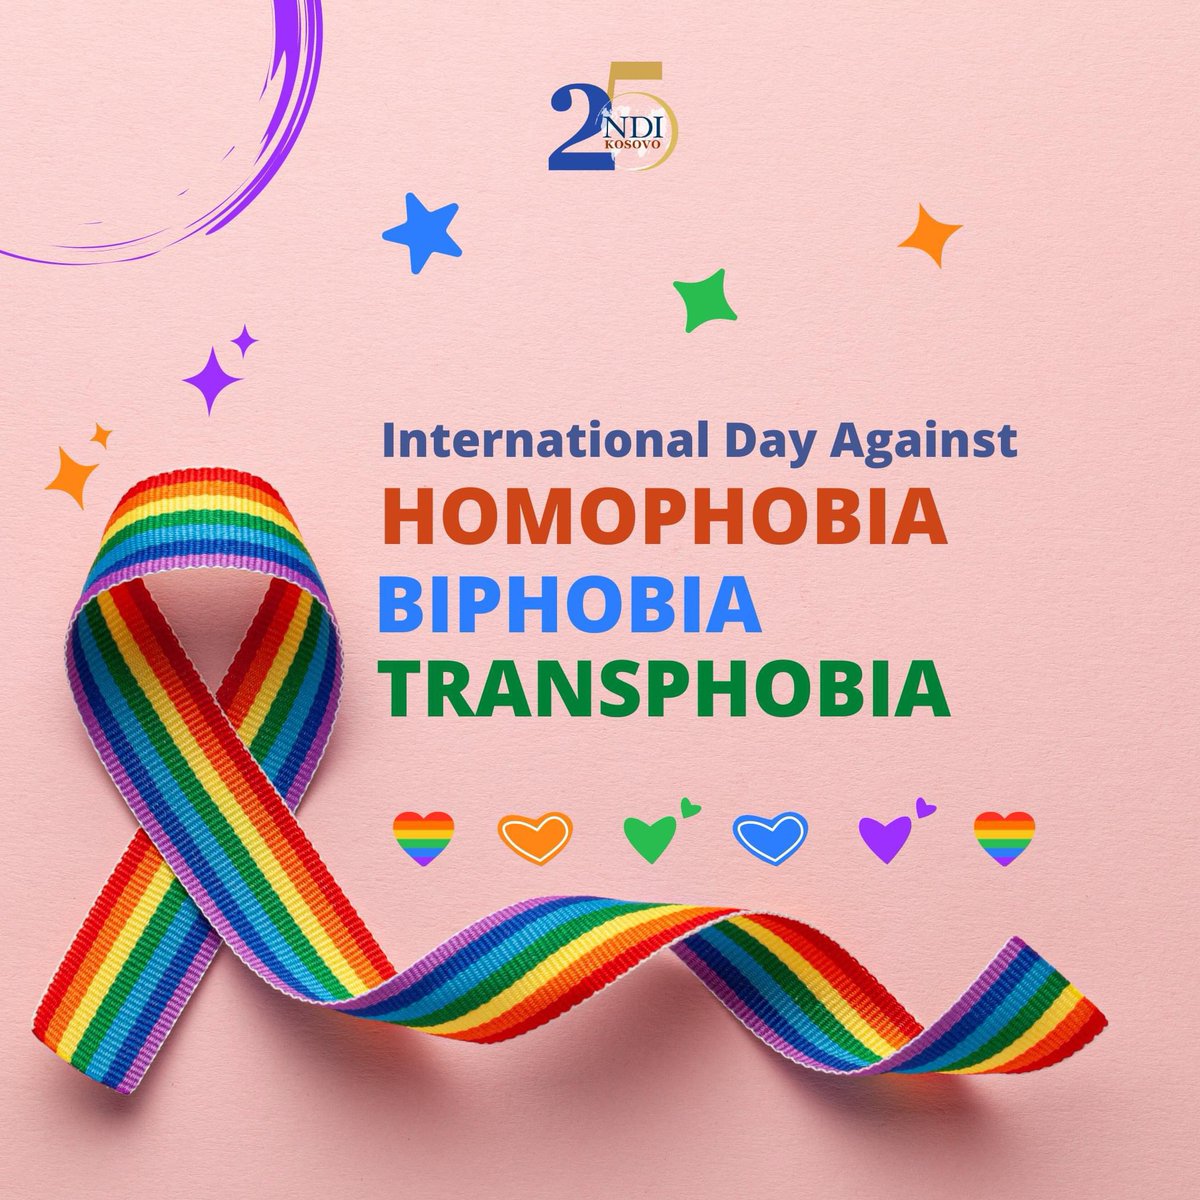 Love is love 💜 Today and every day, let's stand together against discrimination and celebrate love, acceptance, and diversity. 🌈 #NDIKosovo #NDIKosovo25 #IDAHOBIT #LoveWins